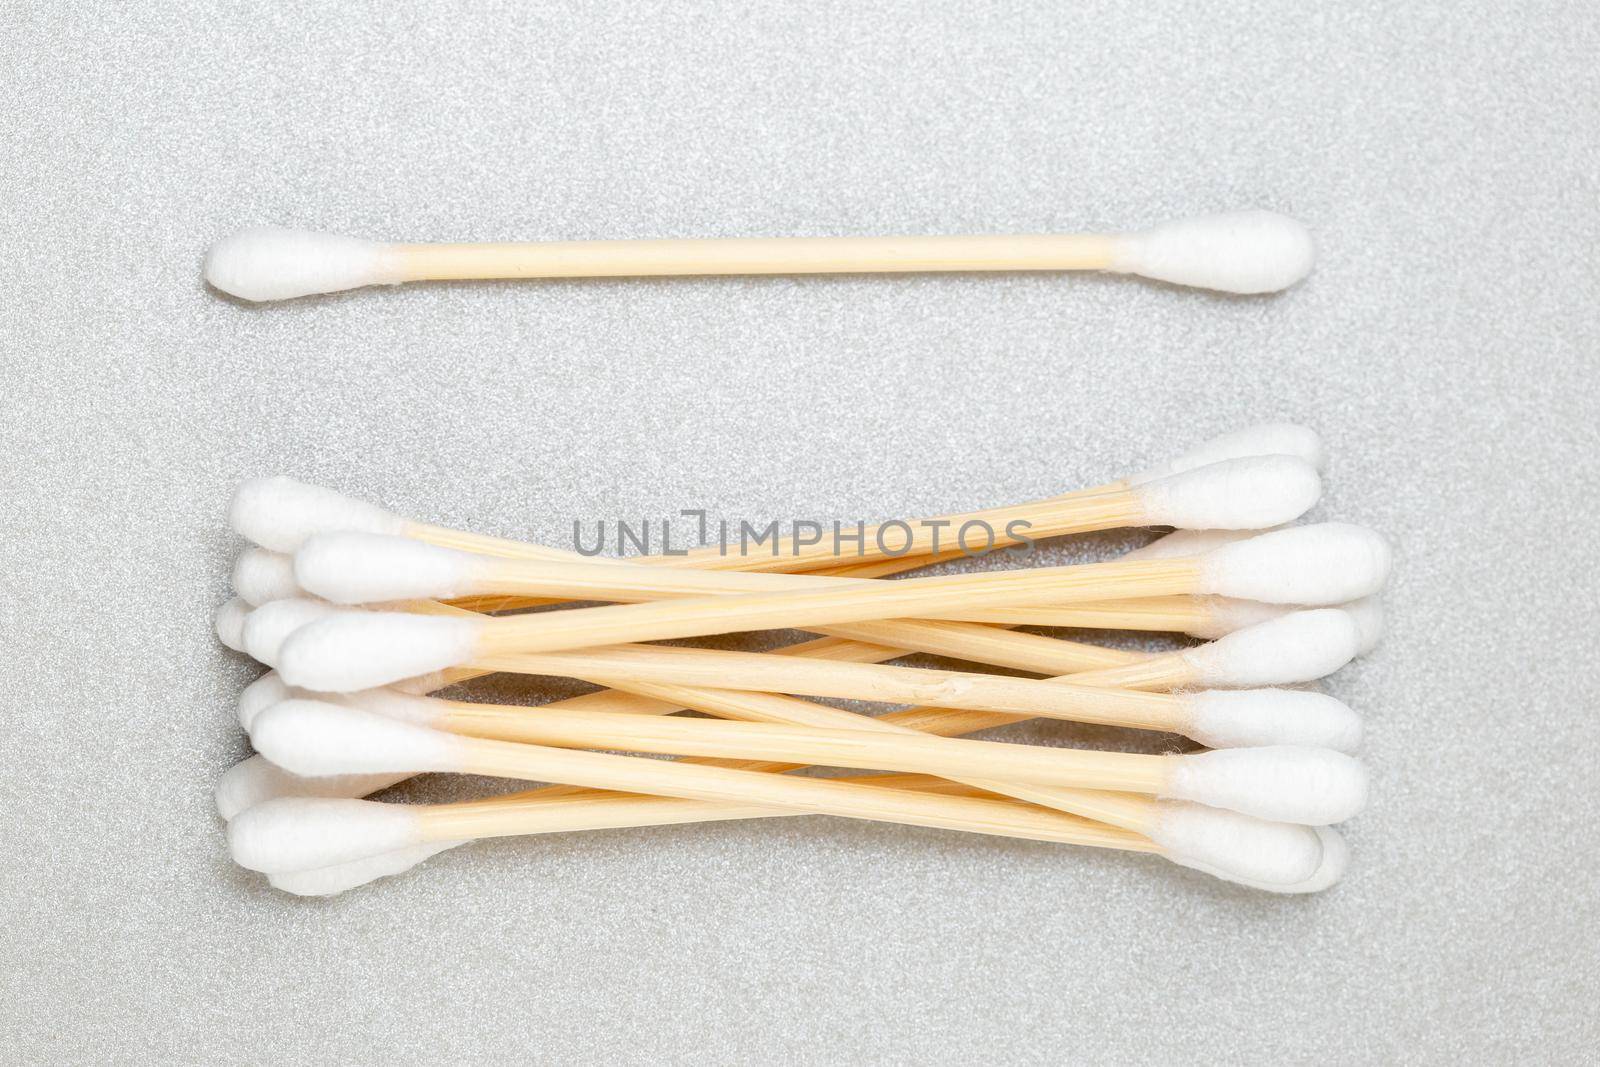 Zero waste bamboo cotton swabs on grey background by Syvanych